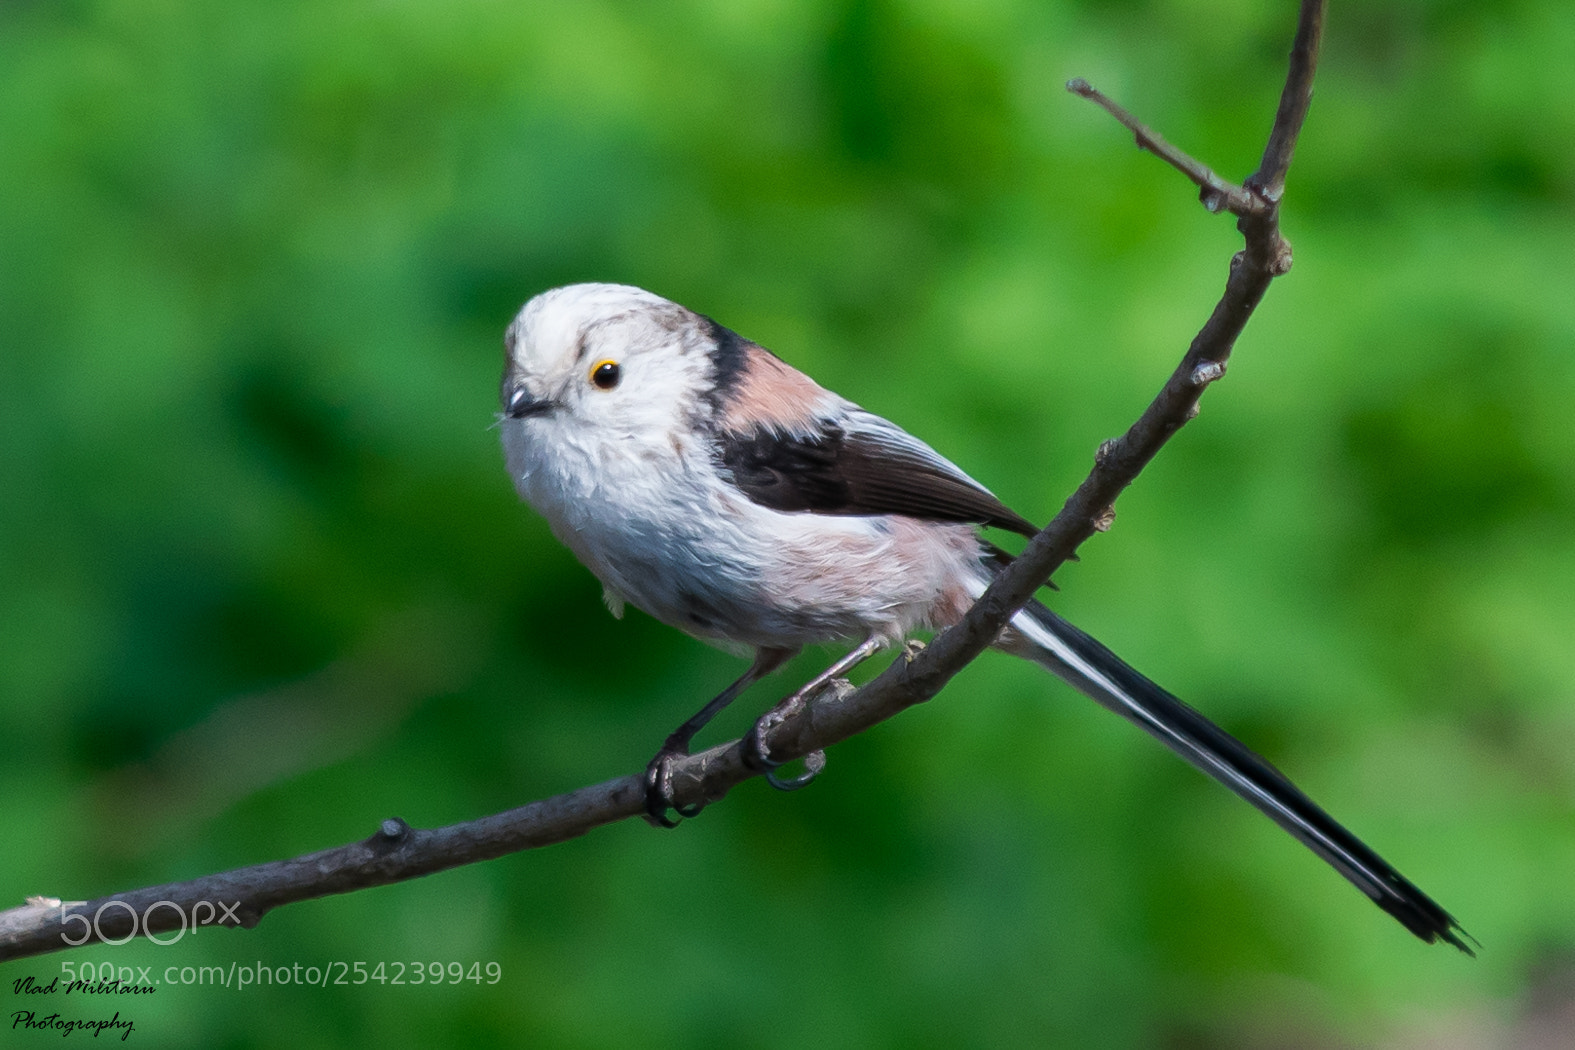 Nikon D5300 sample photo. Long-tailed tit or long-tailed photography